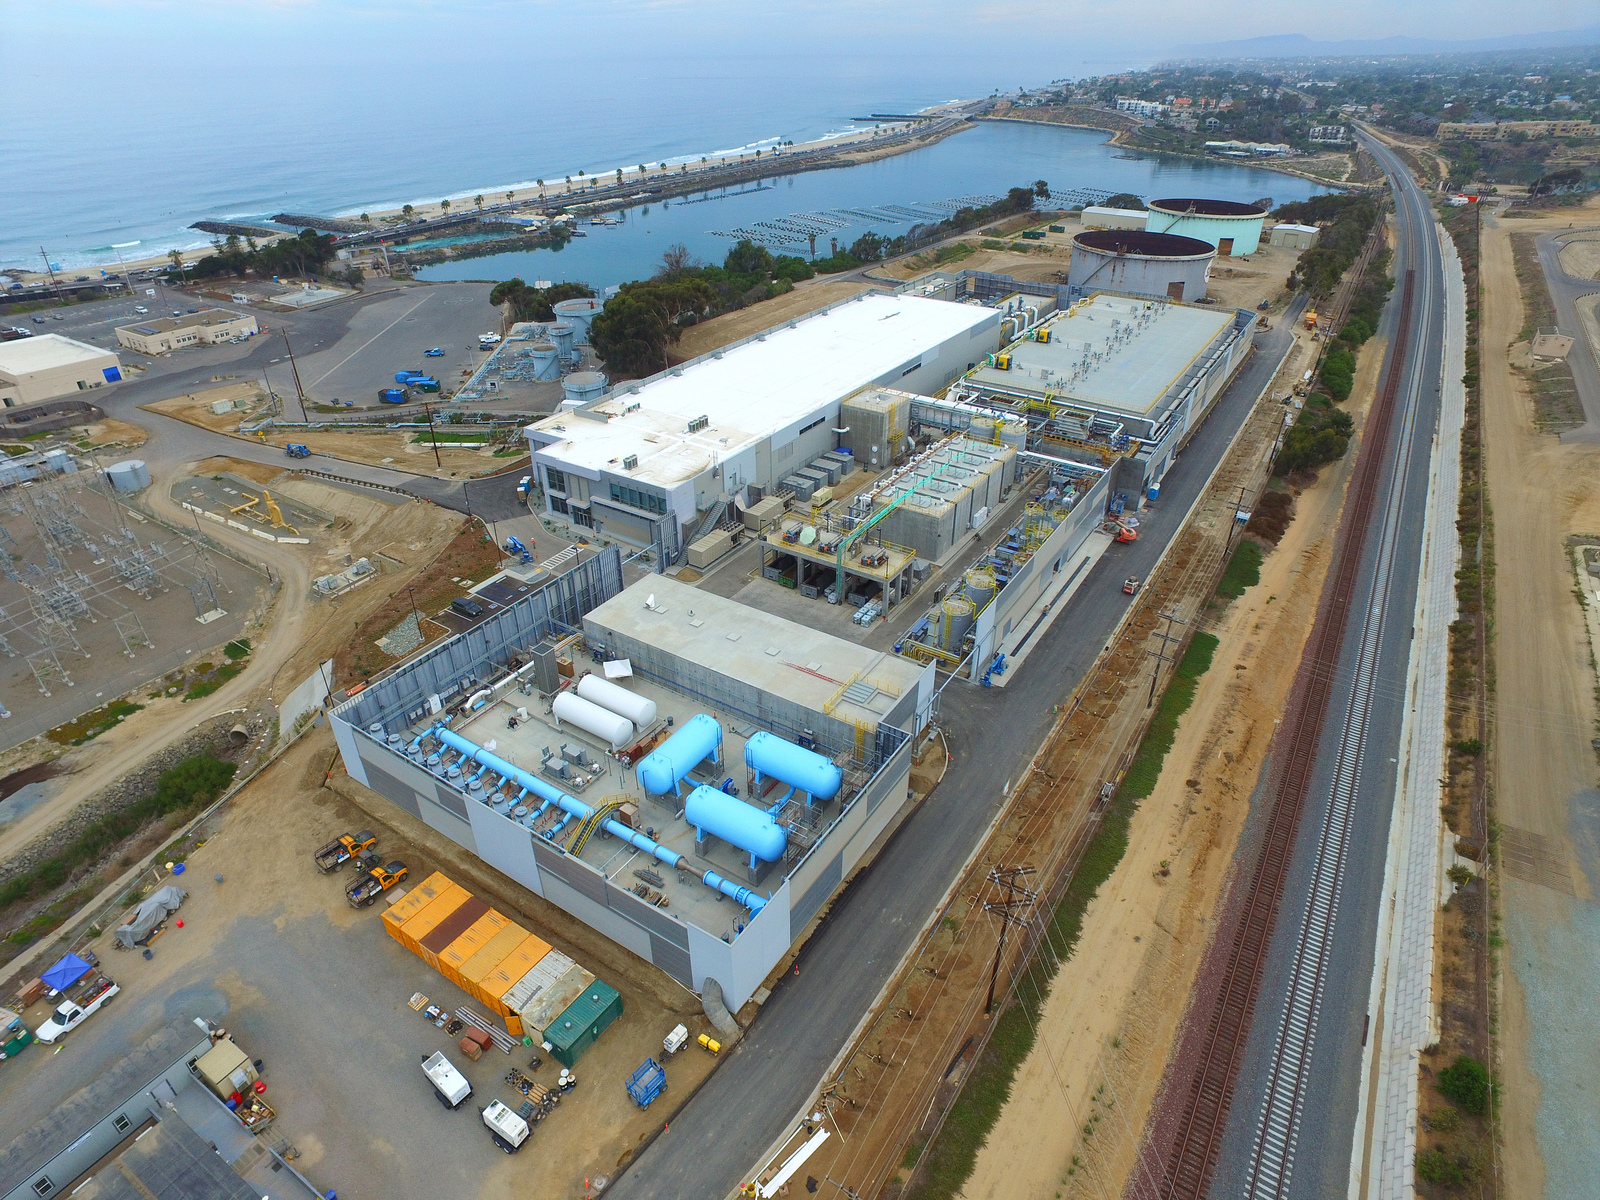 The massive Carlsbad desalination plant is the biggest in the country, capable of supplying water to around 7 percent of the population of San Diego County--but has been cited several times for environmental violations.